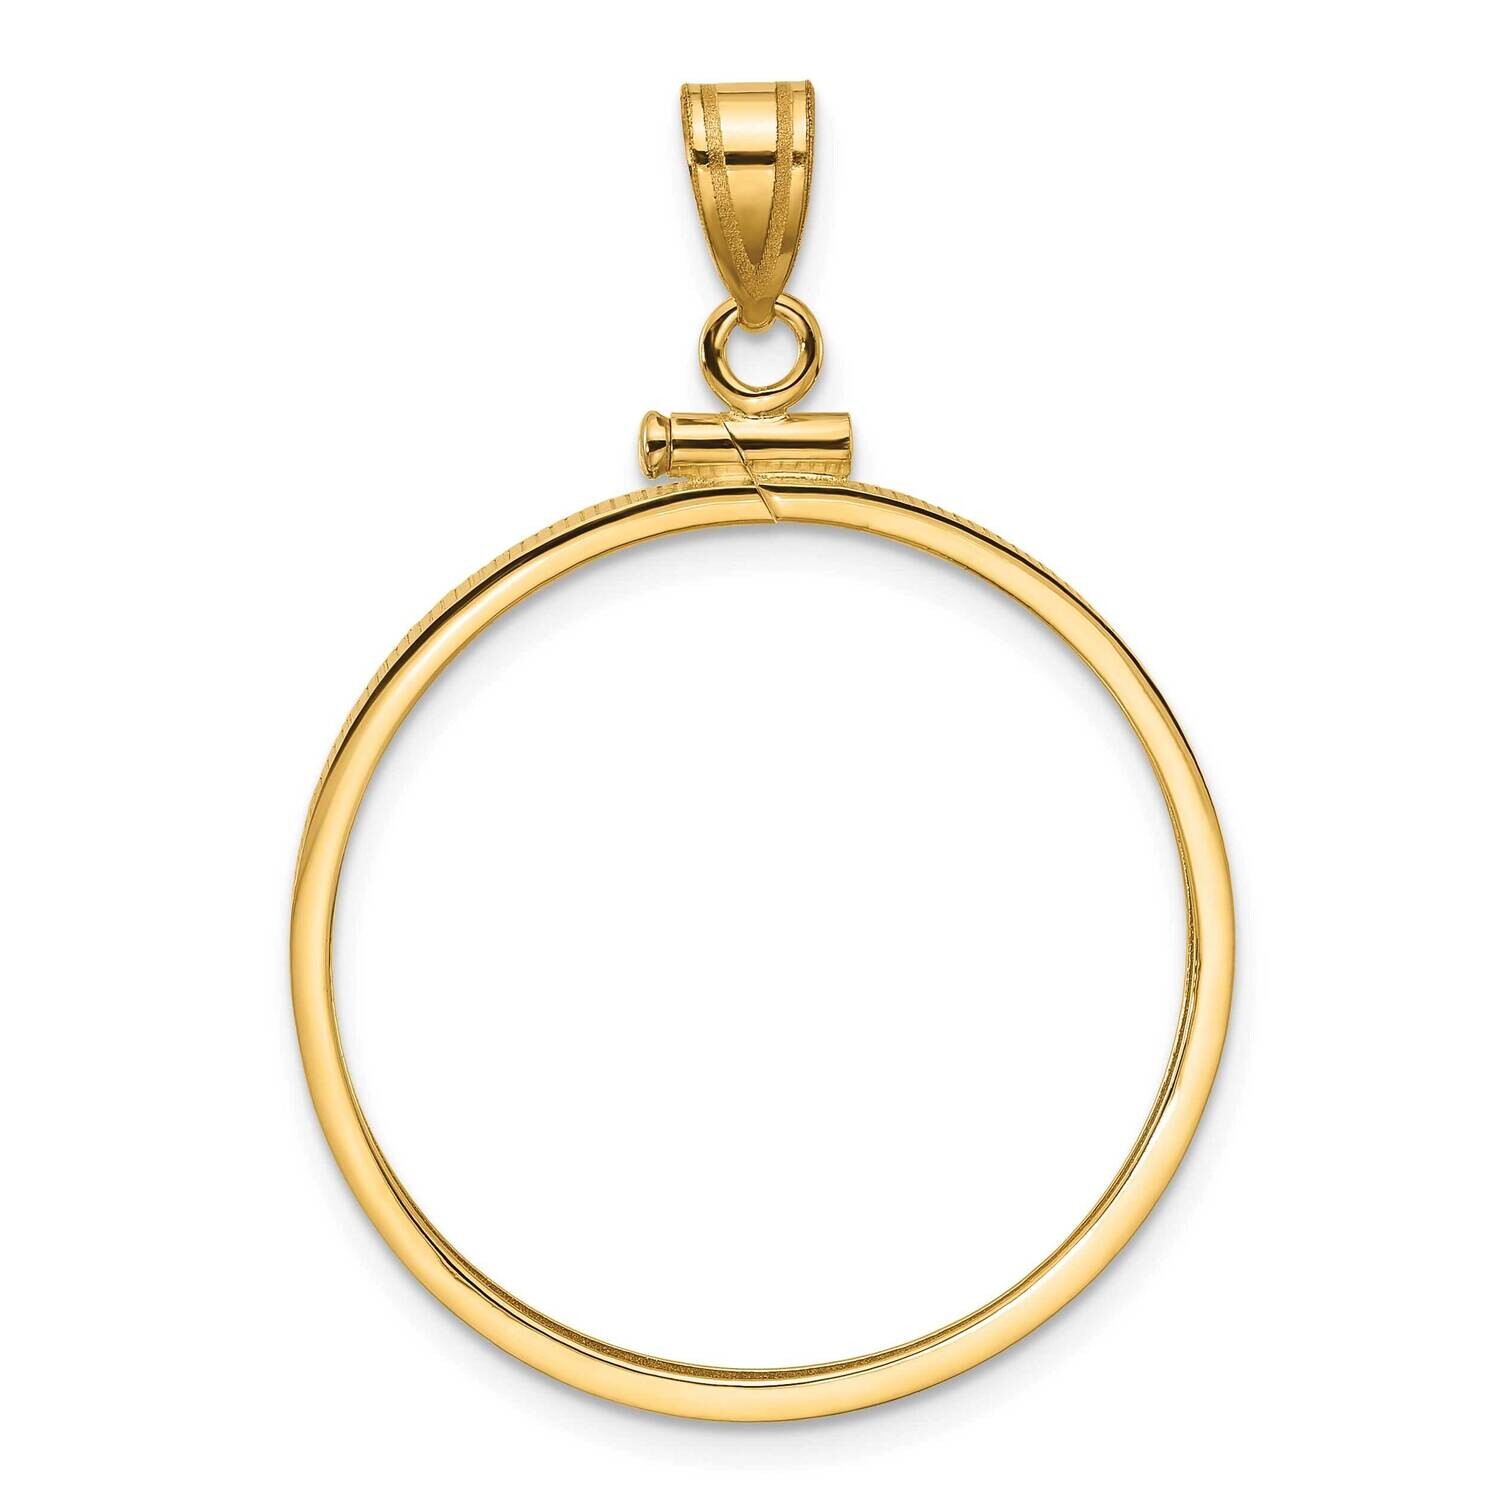 Polished Screw Top 27.0mm X 2.35mm Coin Bezel Pendant 14k Gold C1885/27.0